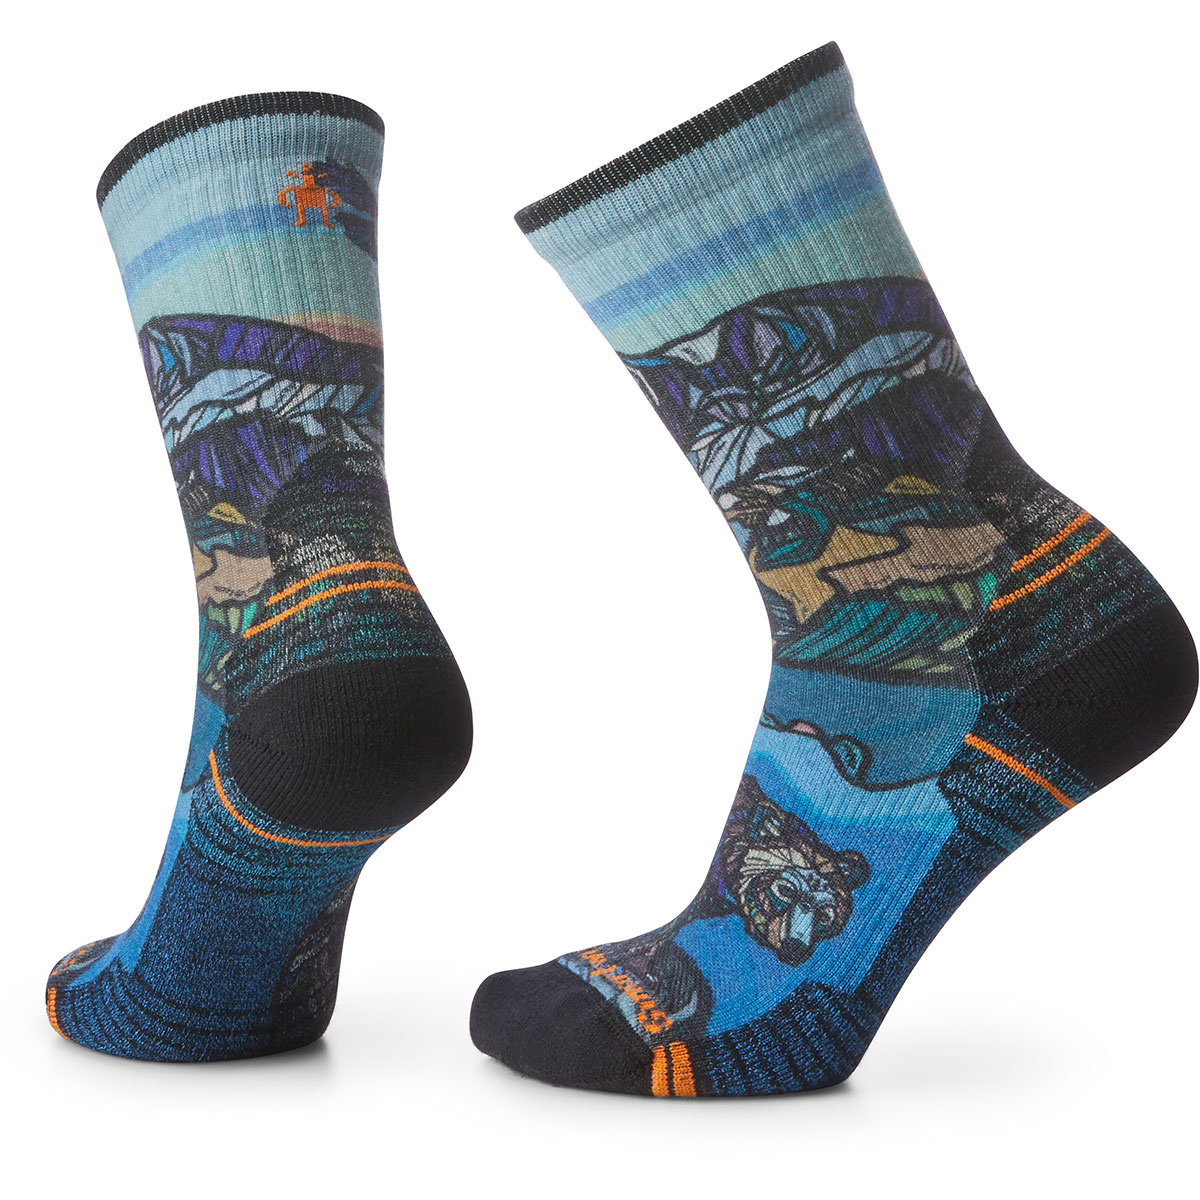 Image of Smartwool Donna Calze Hike Light Icy Range Crew